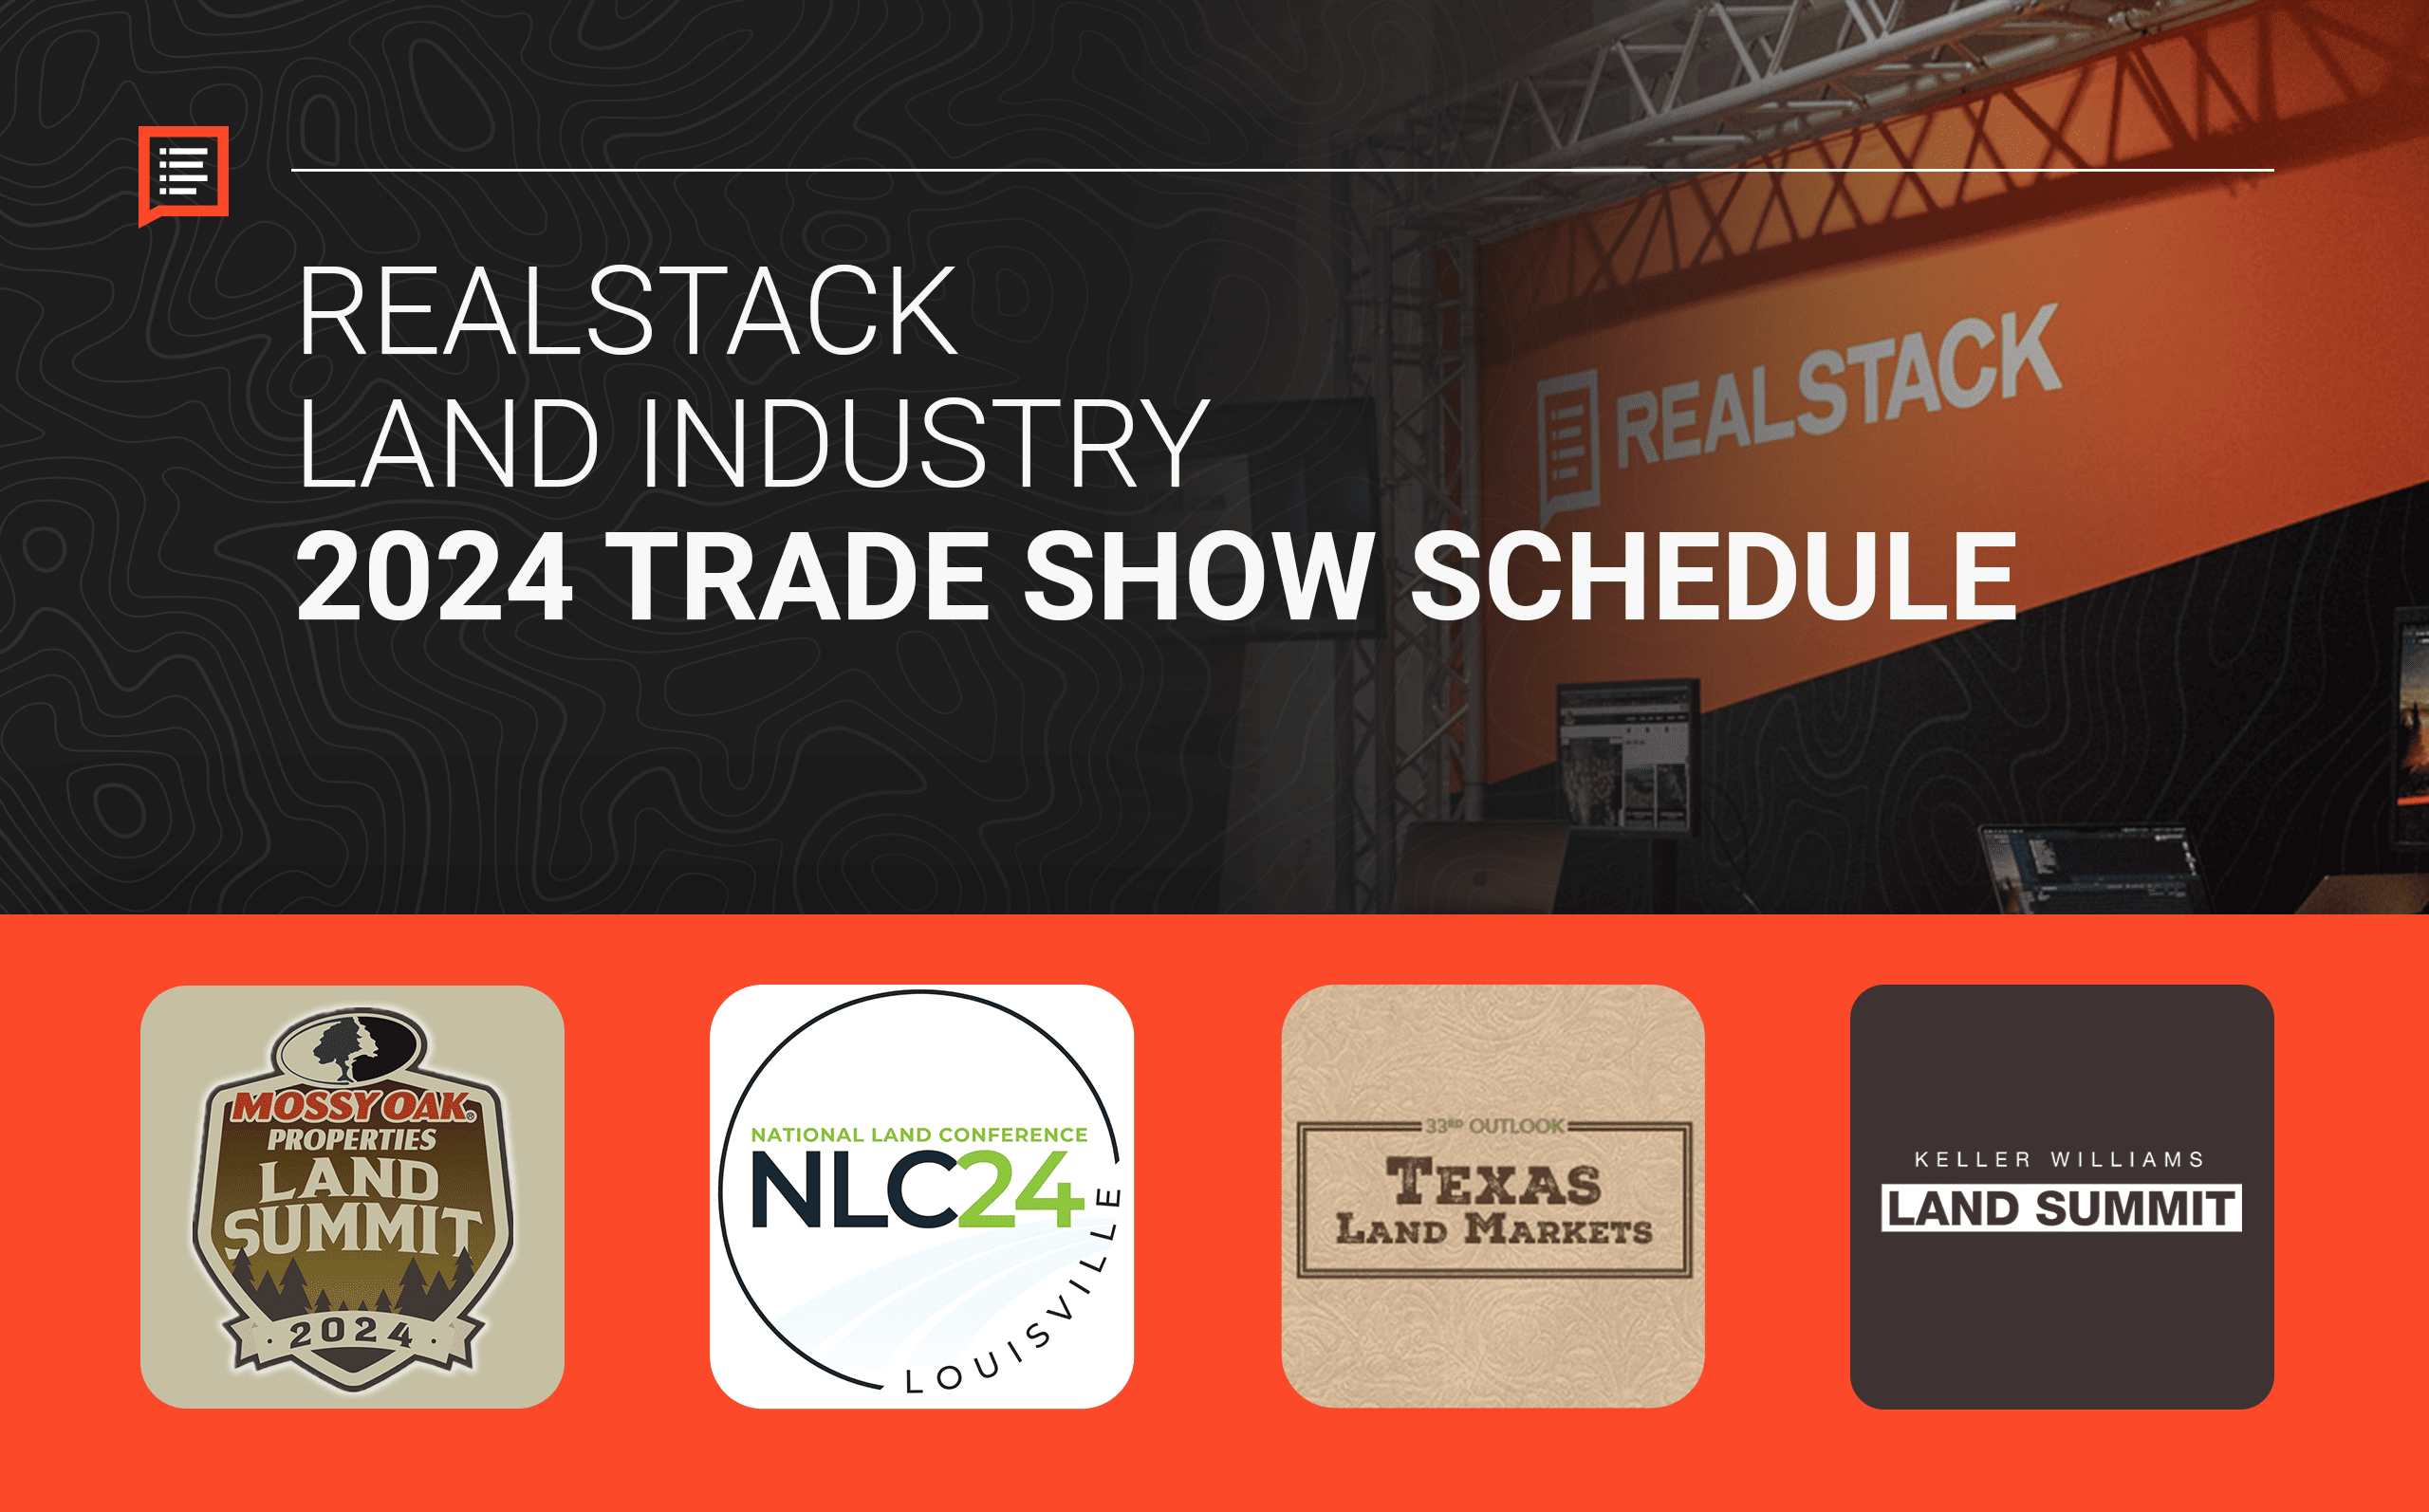 REALSTACK Announces 2024 Trade Show Schedule REALSTACK